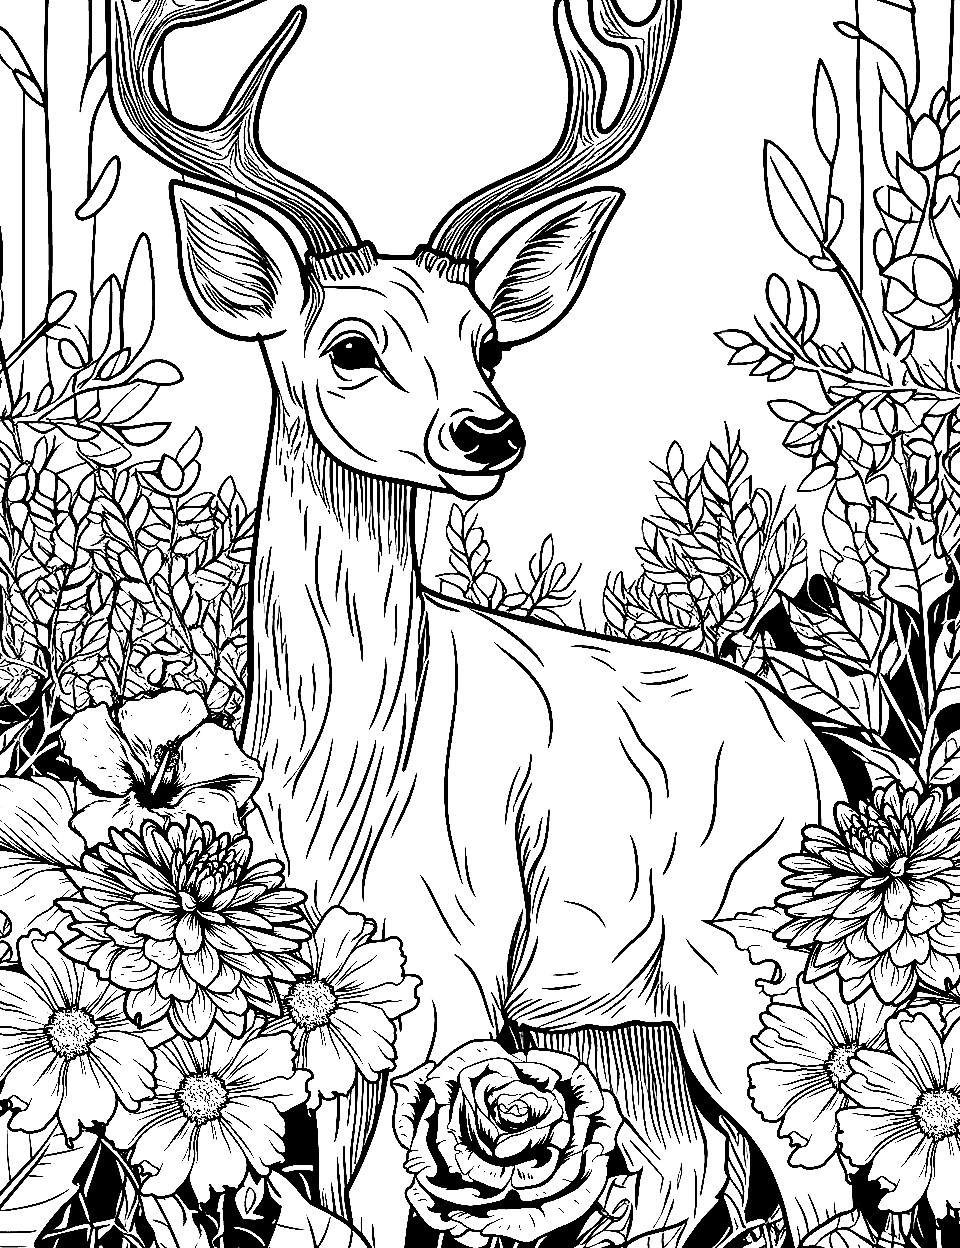 Jungle Jamboree Coloring Page - A deer surrounded by trees and plants.